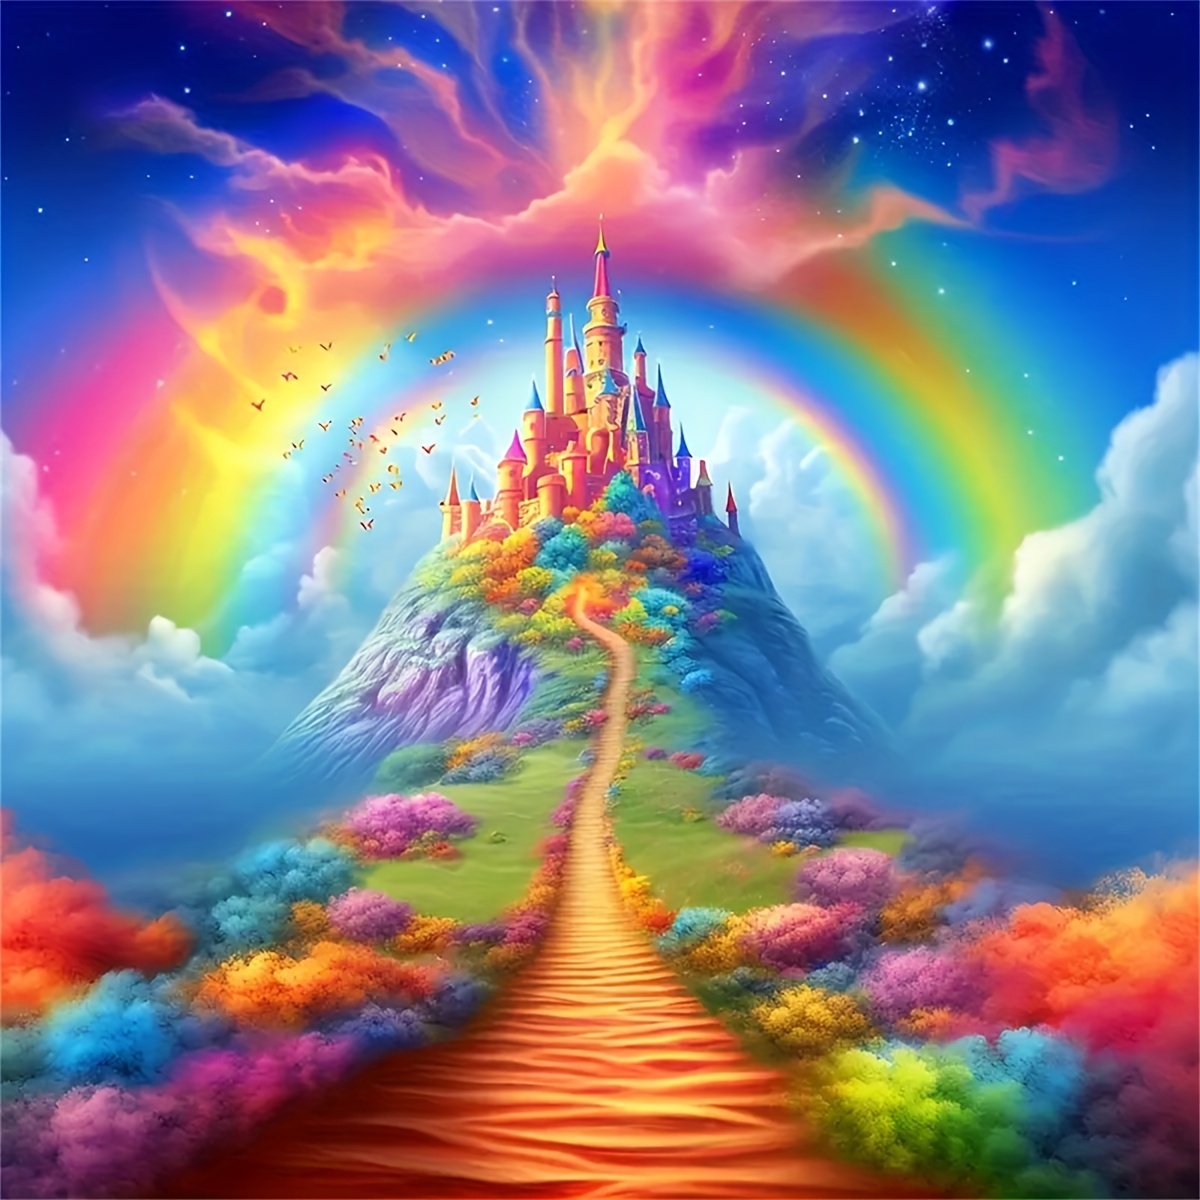 

1pc Large Size 40*40cm/15.7*15.7in Frameless Holiday Surprise Gift Diy Handmade 5d Diamond Painting Rainbow Castle Full Diamond Painting Art Embroidery Diamond Painting Art Craft Wall Decoration